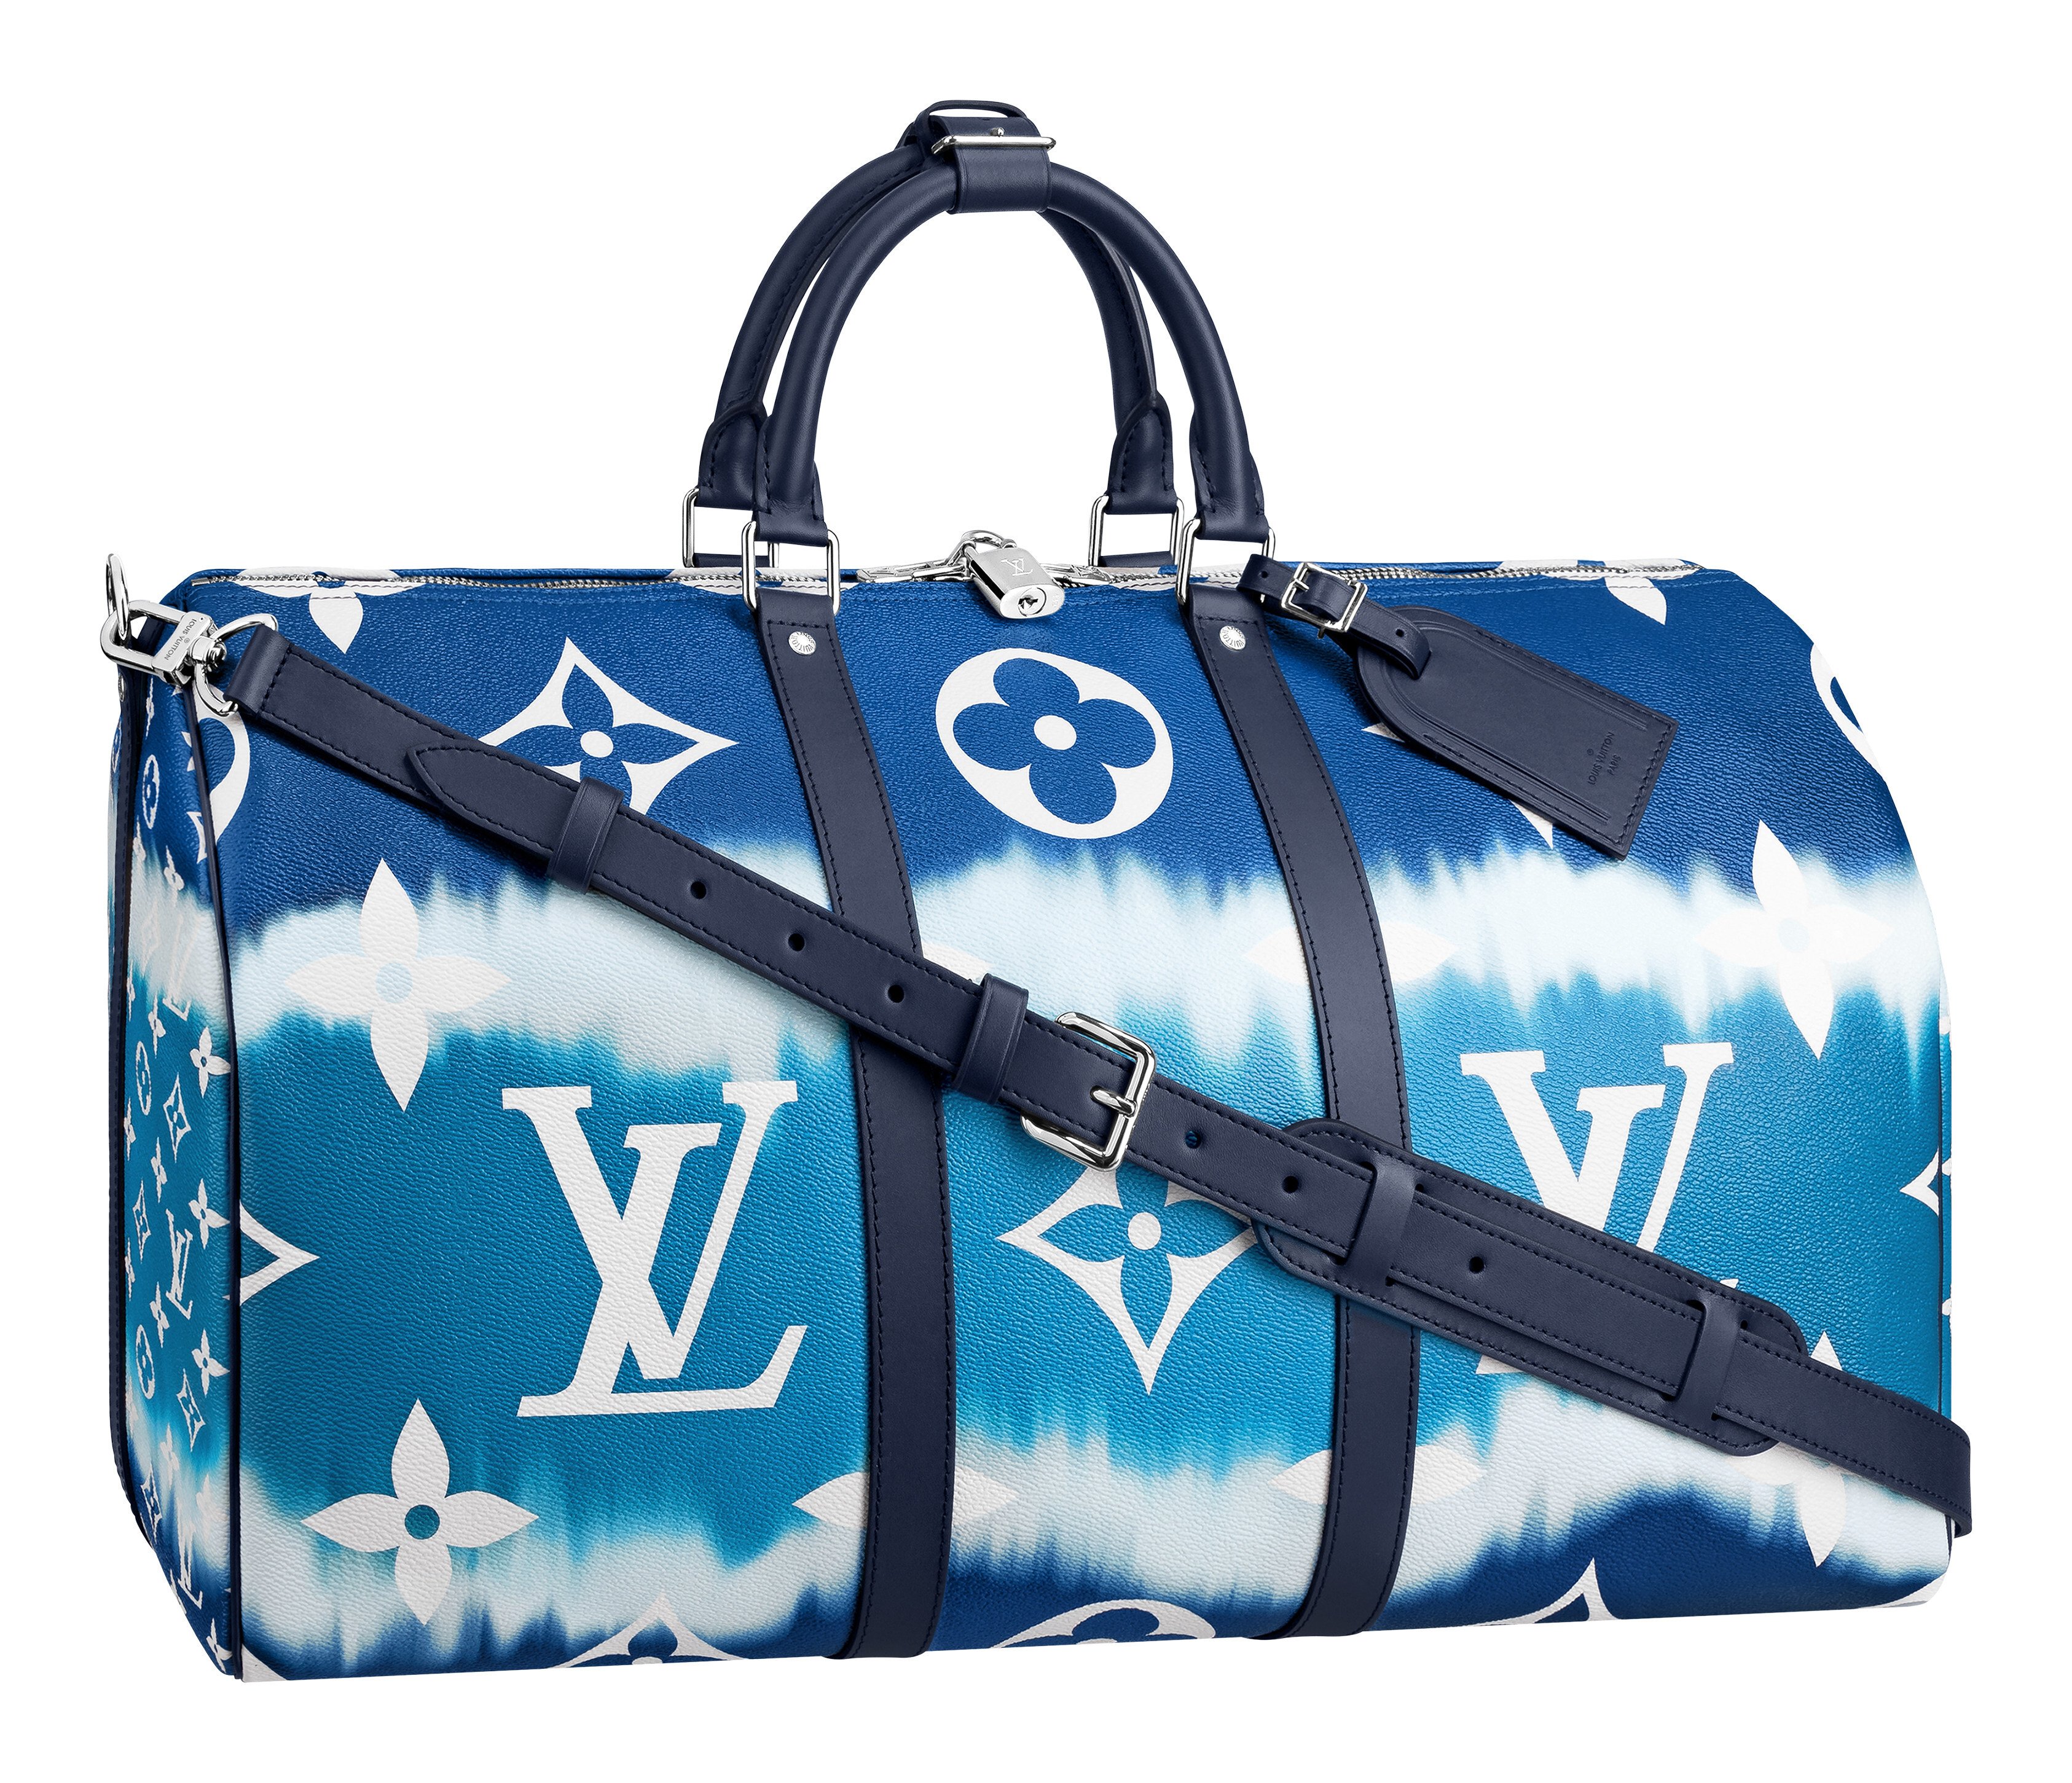 Are Louis Vuitton bags from China real? - Quora